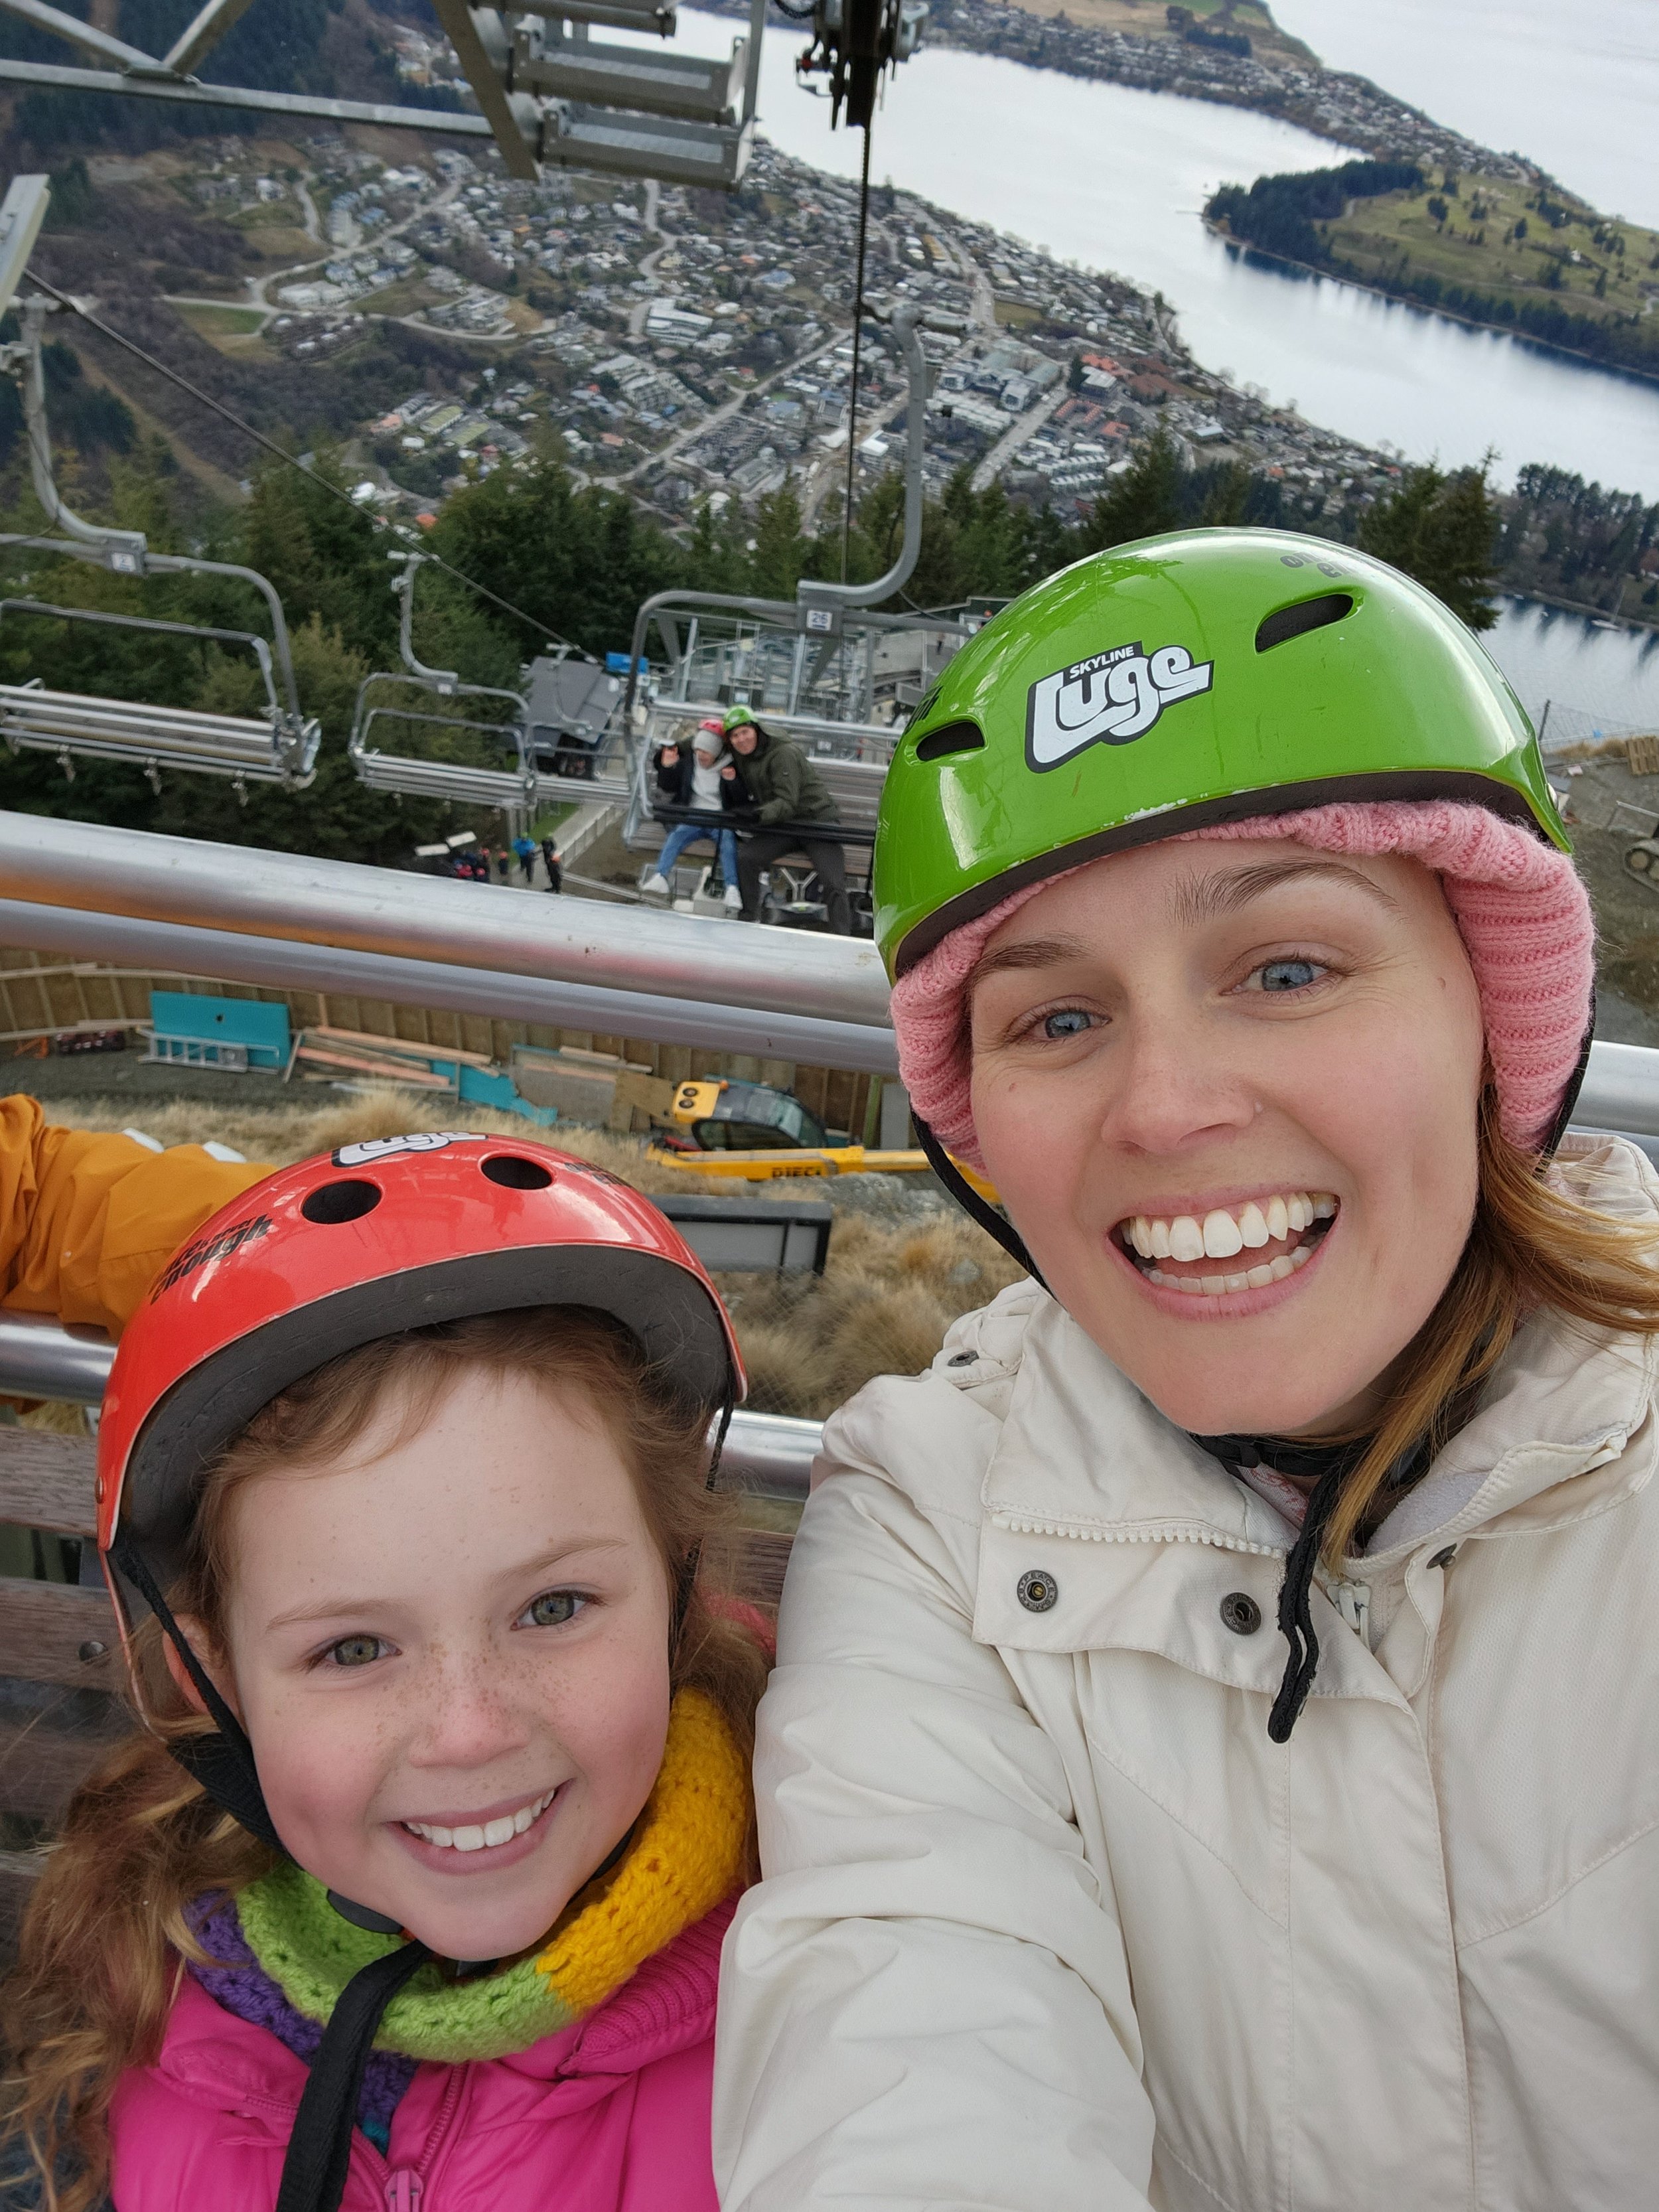 Going on the chairlift with kids